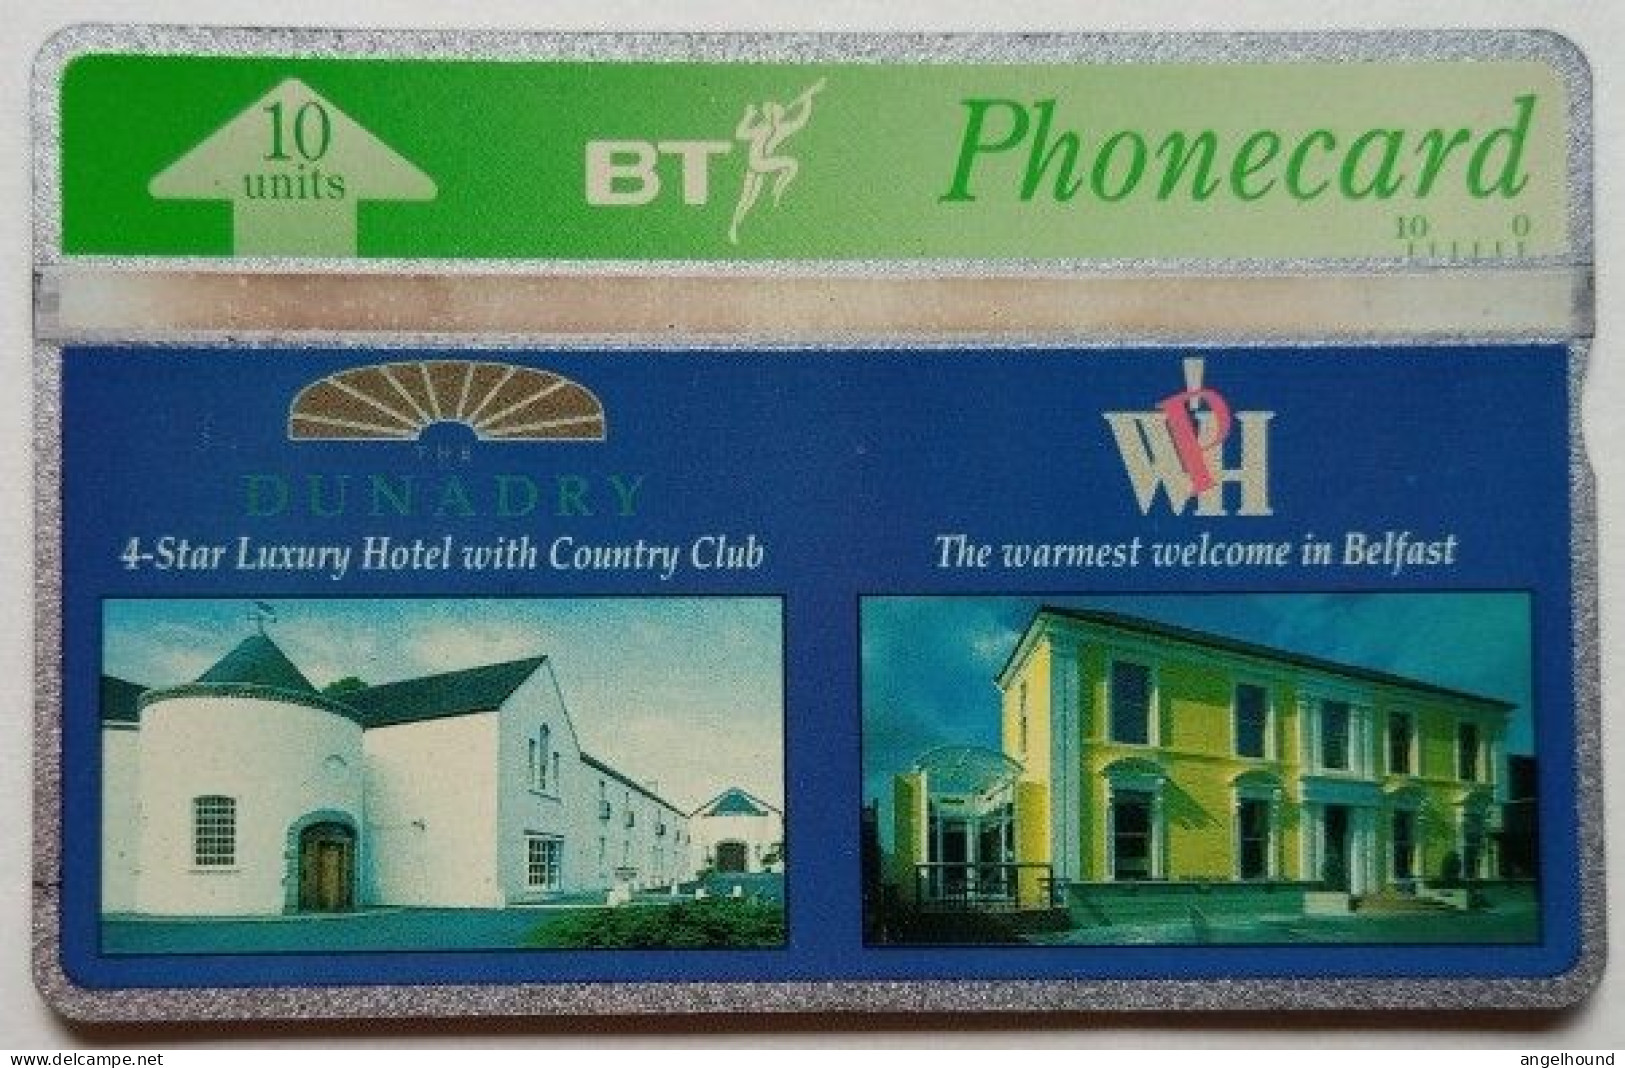 UK BT 10 Units Landis And Gyr  ( Only 500 Issued ) - Dunadry And Wellington Park Hotel ( Arthur Mooney Blackprint   ) - BT Advertising Issues